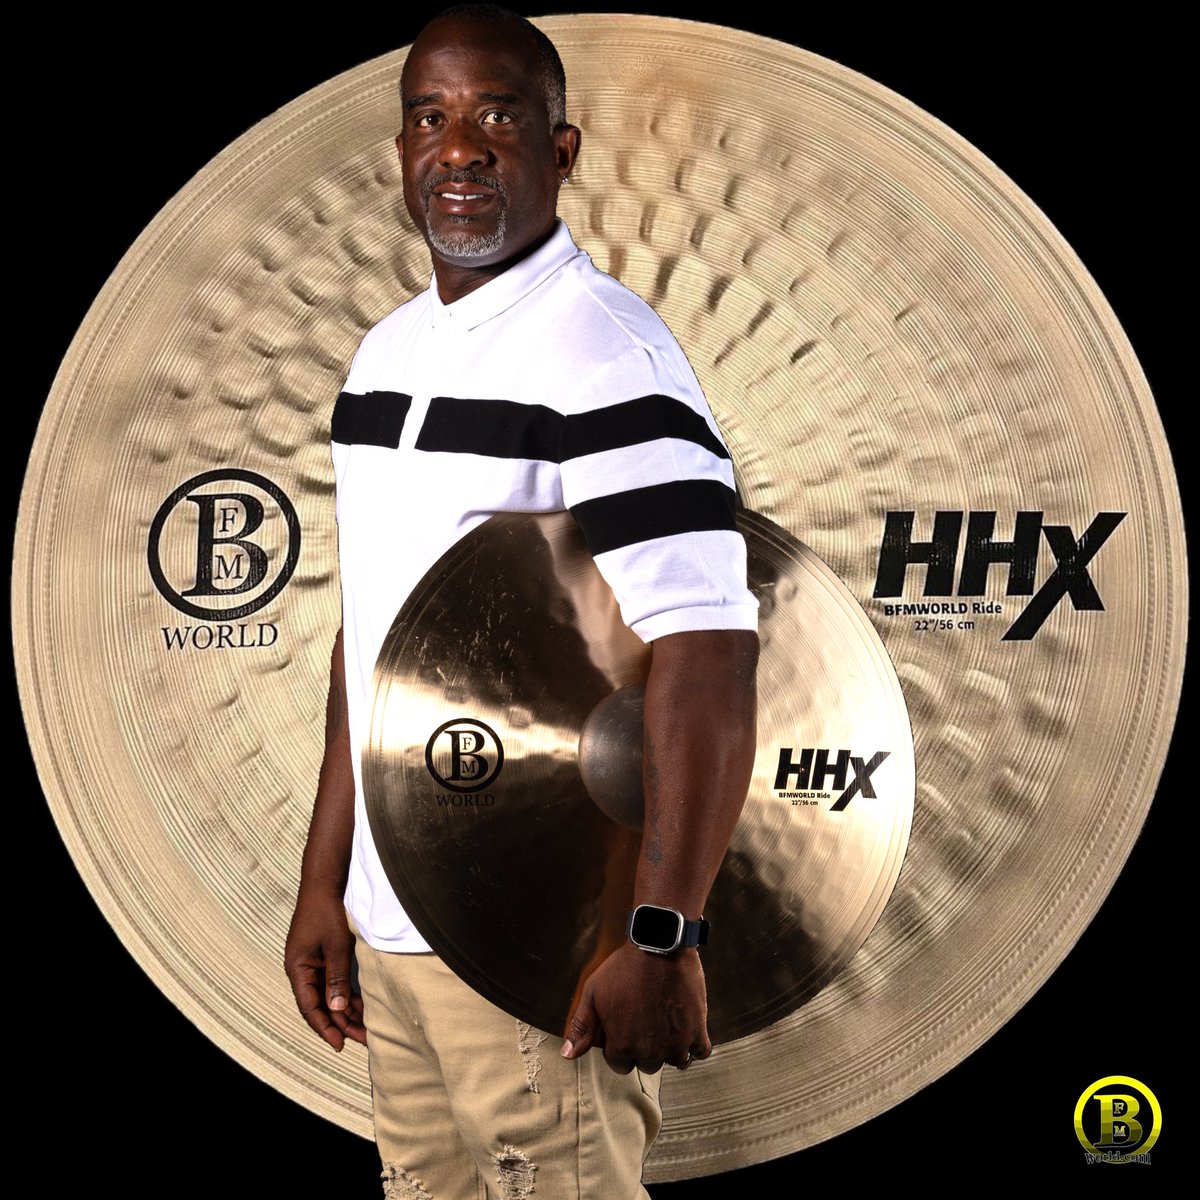 Introducing the 22” HHX BFMWORLD RIDE by BFMWORLD @SABIAN_Cymbals ! A collaboration with the great @BrianFrasierM AVAILABLE AT BFMWORLD.com, this is a medium weight ride cymbal with a large, clear, cutting bell. Its proprietary HHX Tone Control hammering creates…